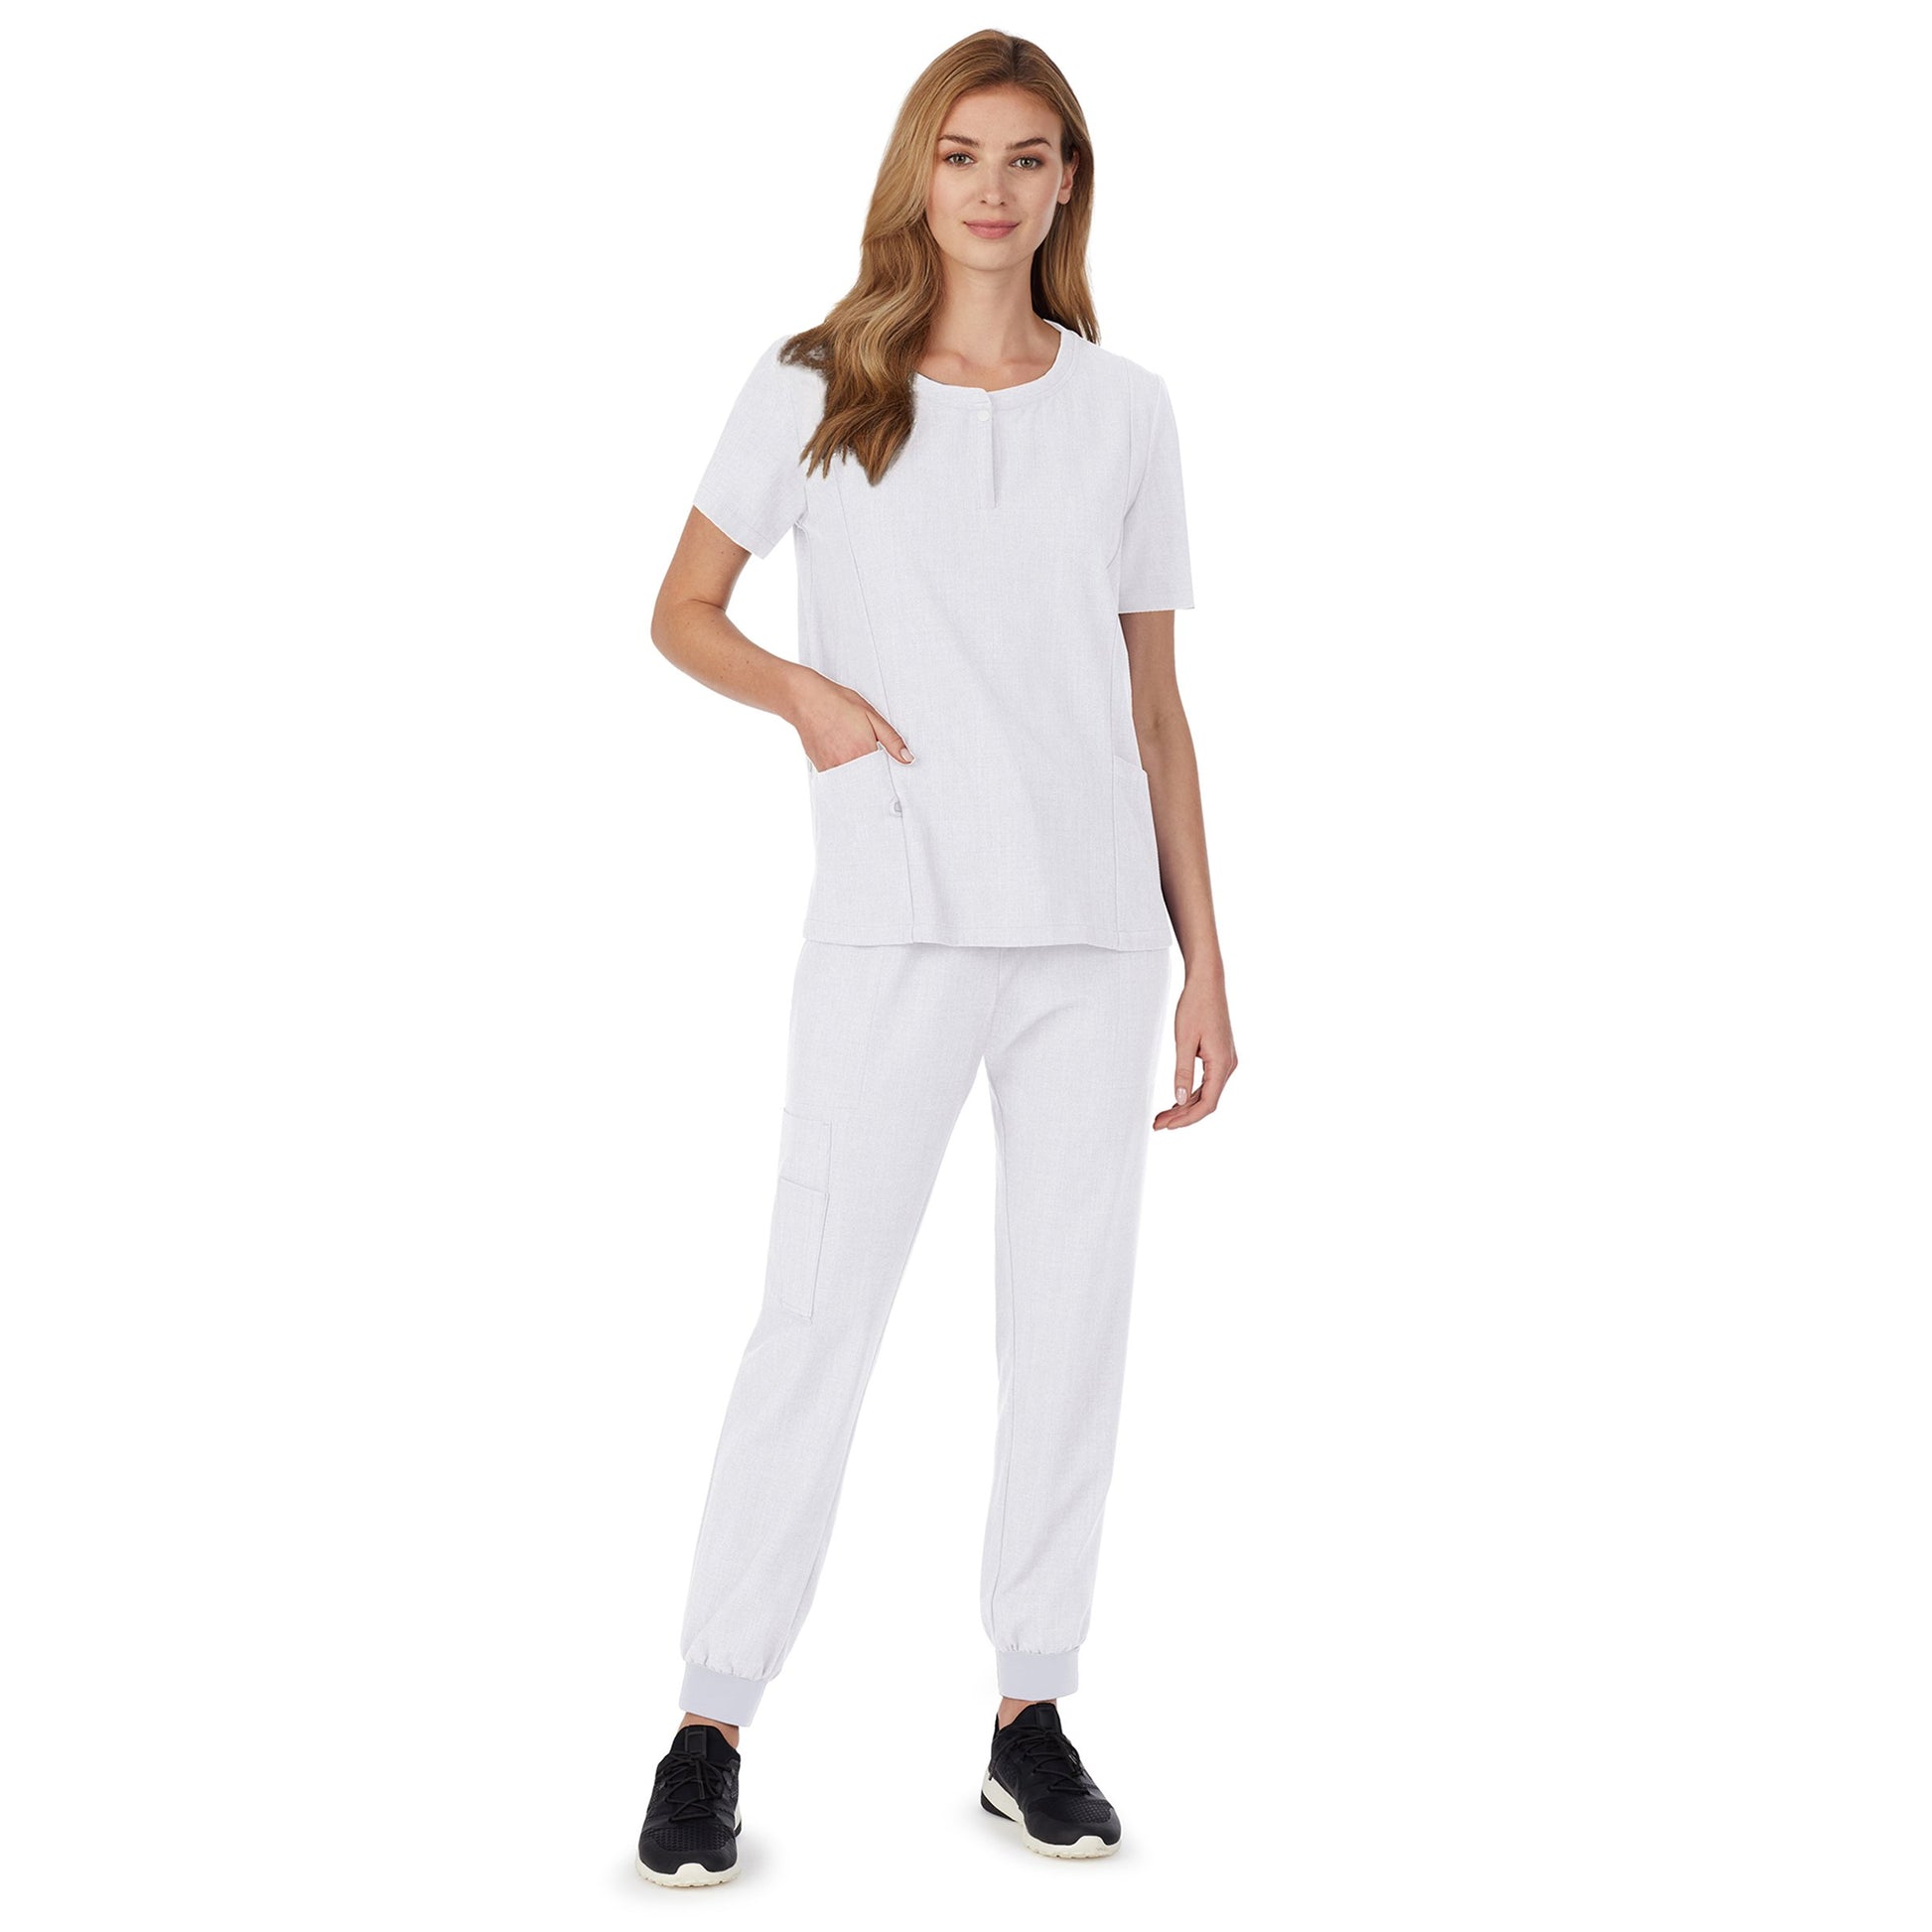 White;@A lady wearing white scrub henley neck top with side pockets petite.